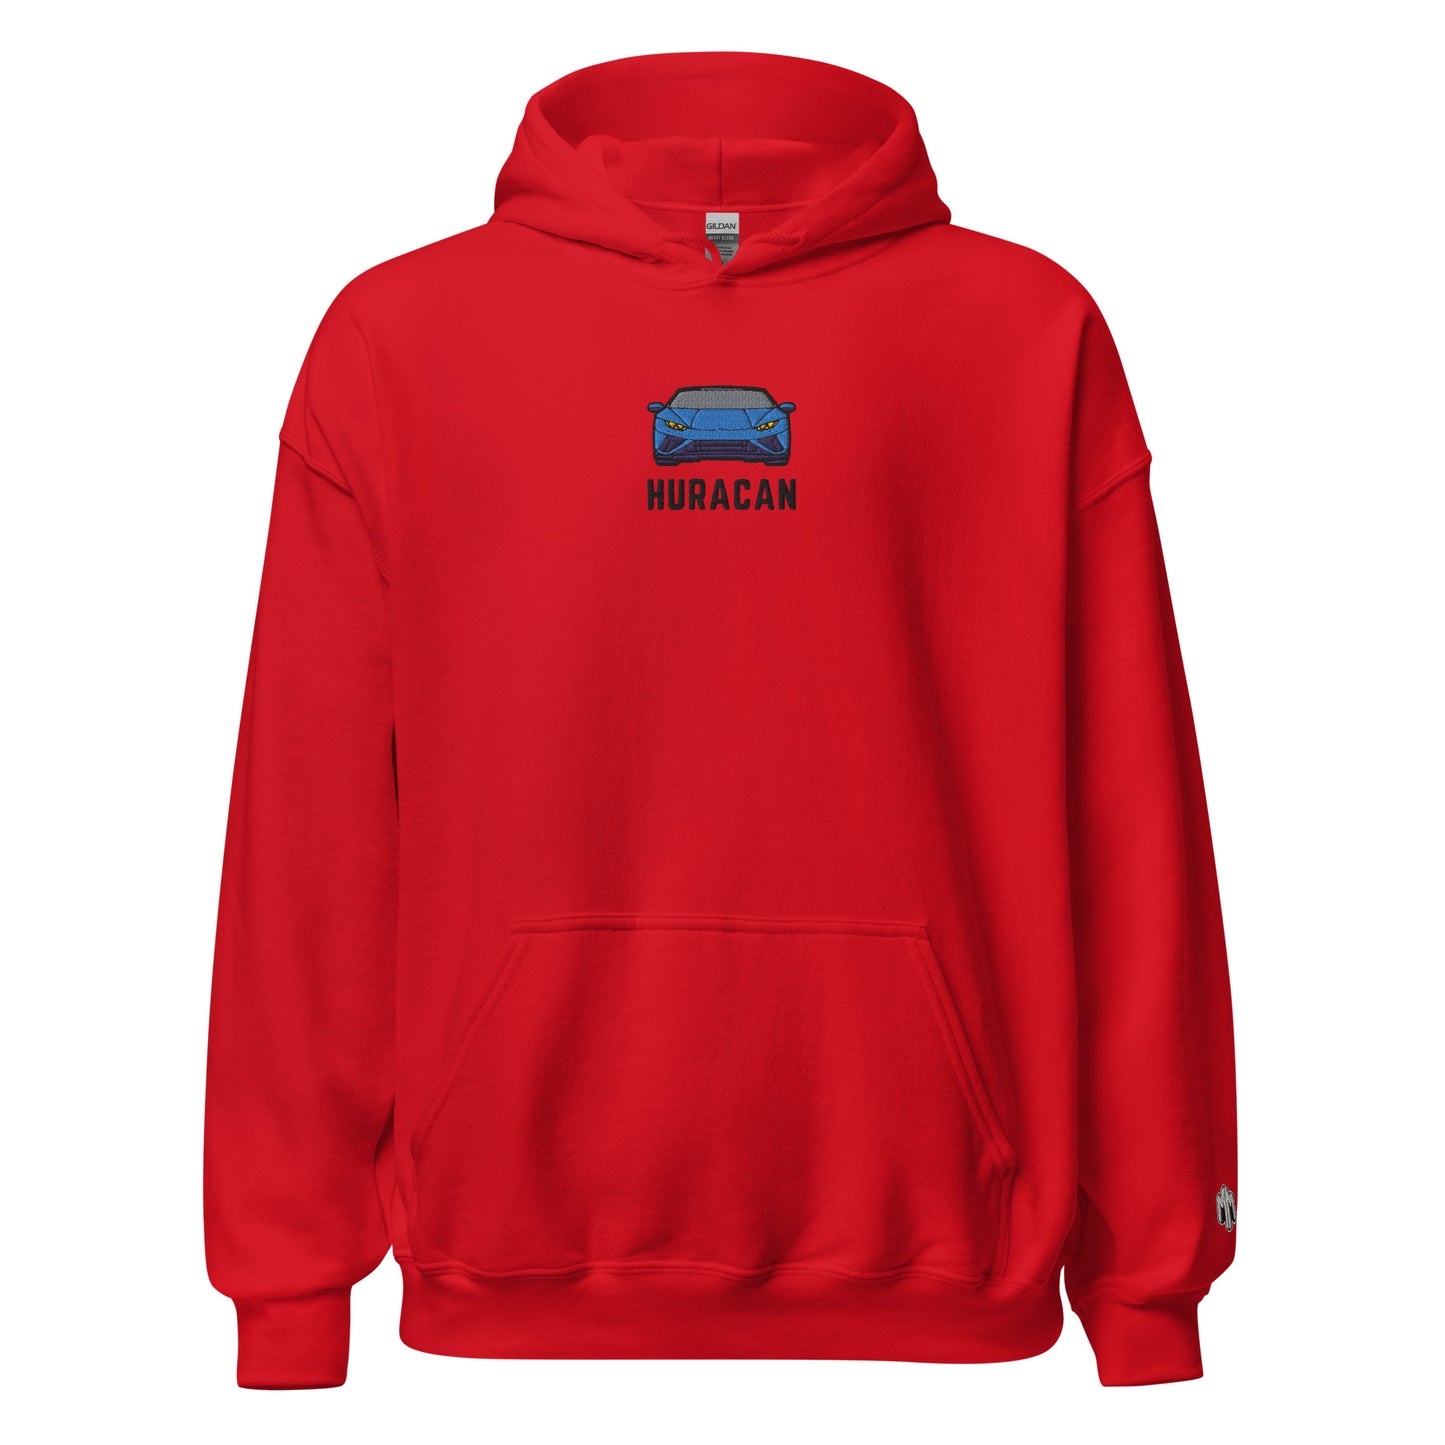 Blue Huracan | Hoodie (Embroidered)